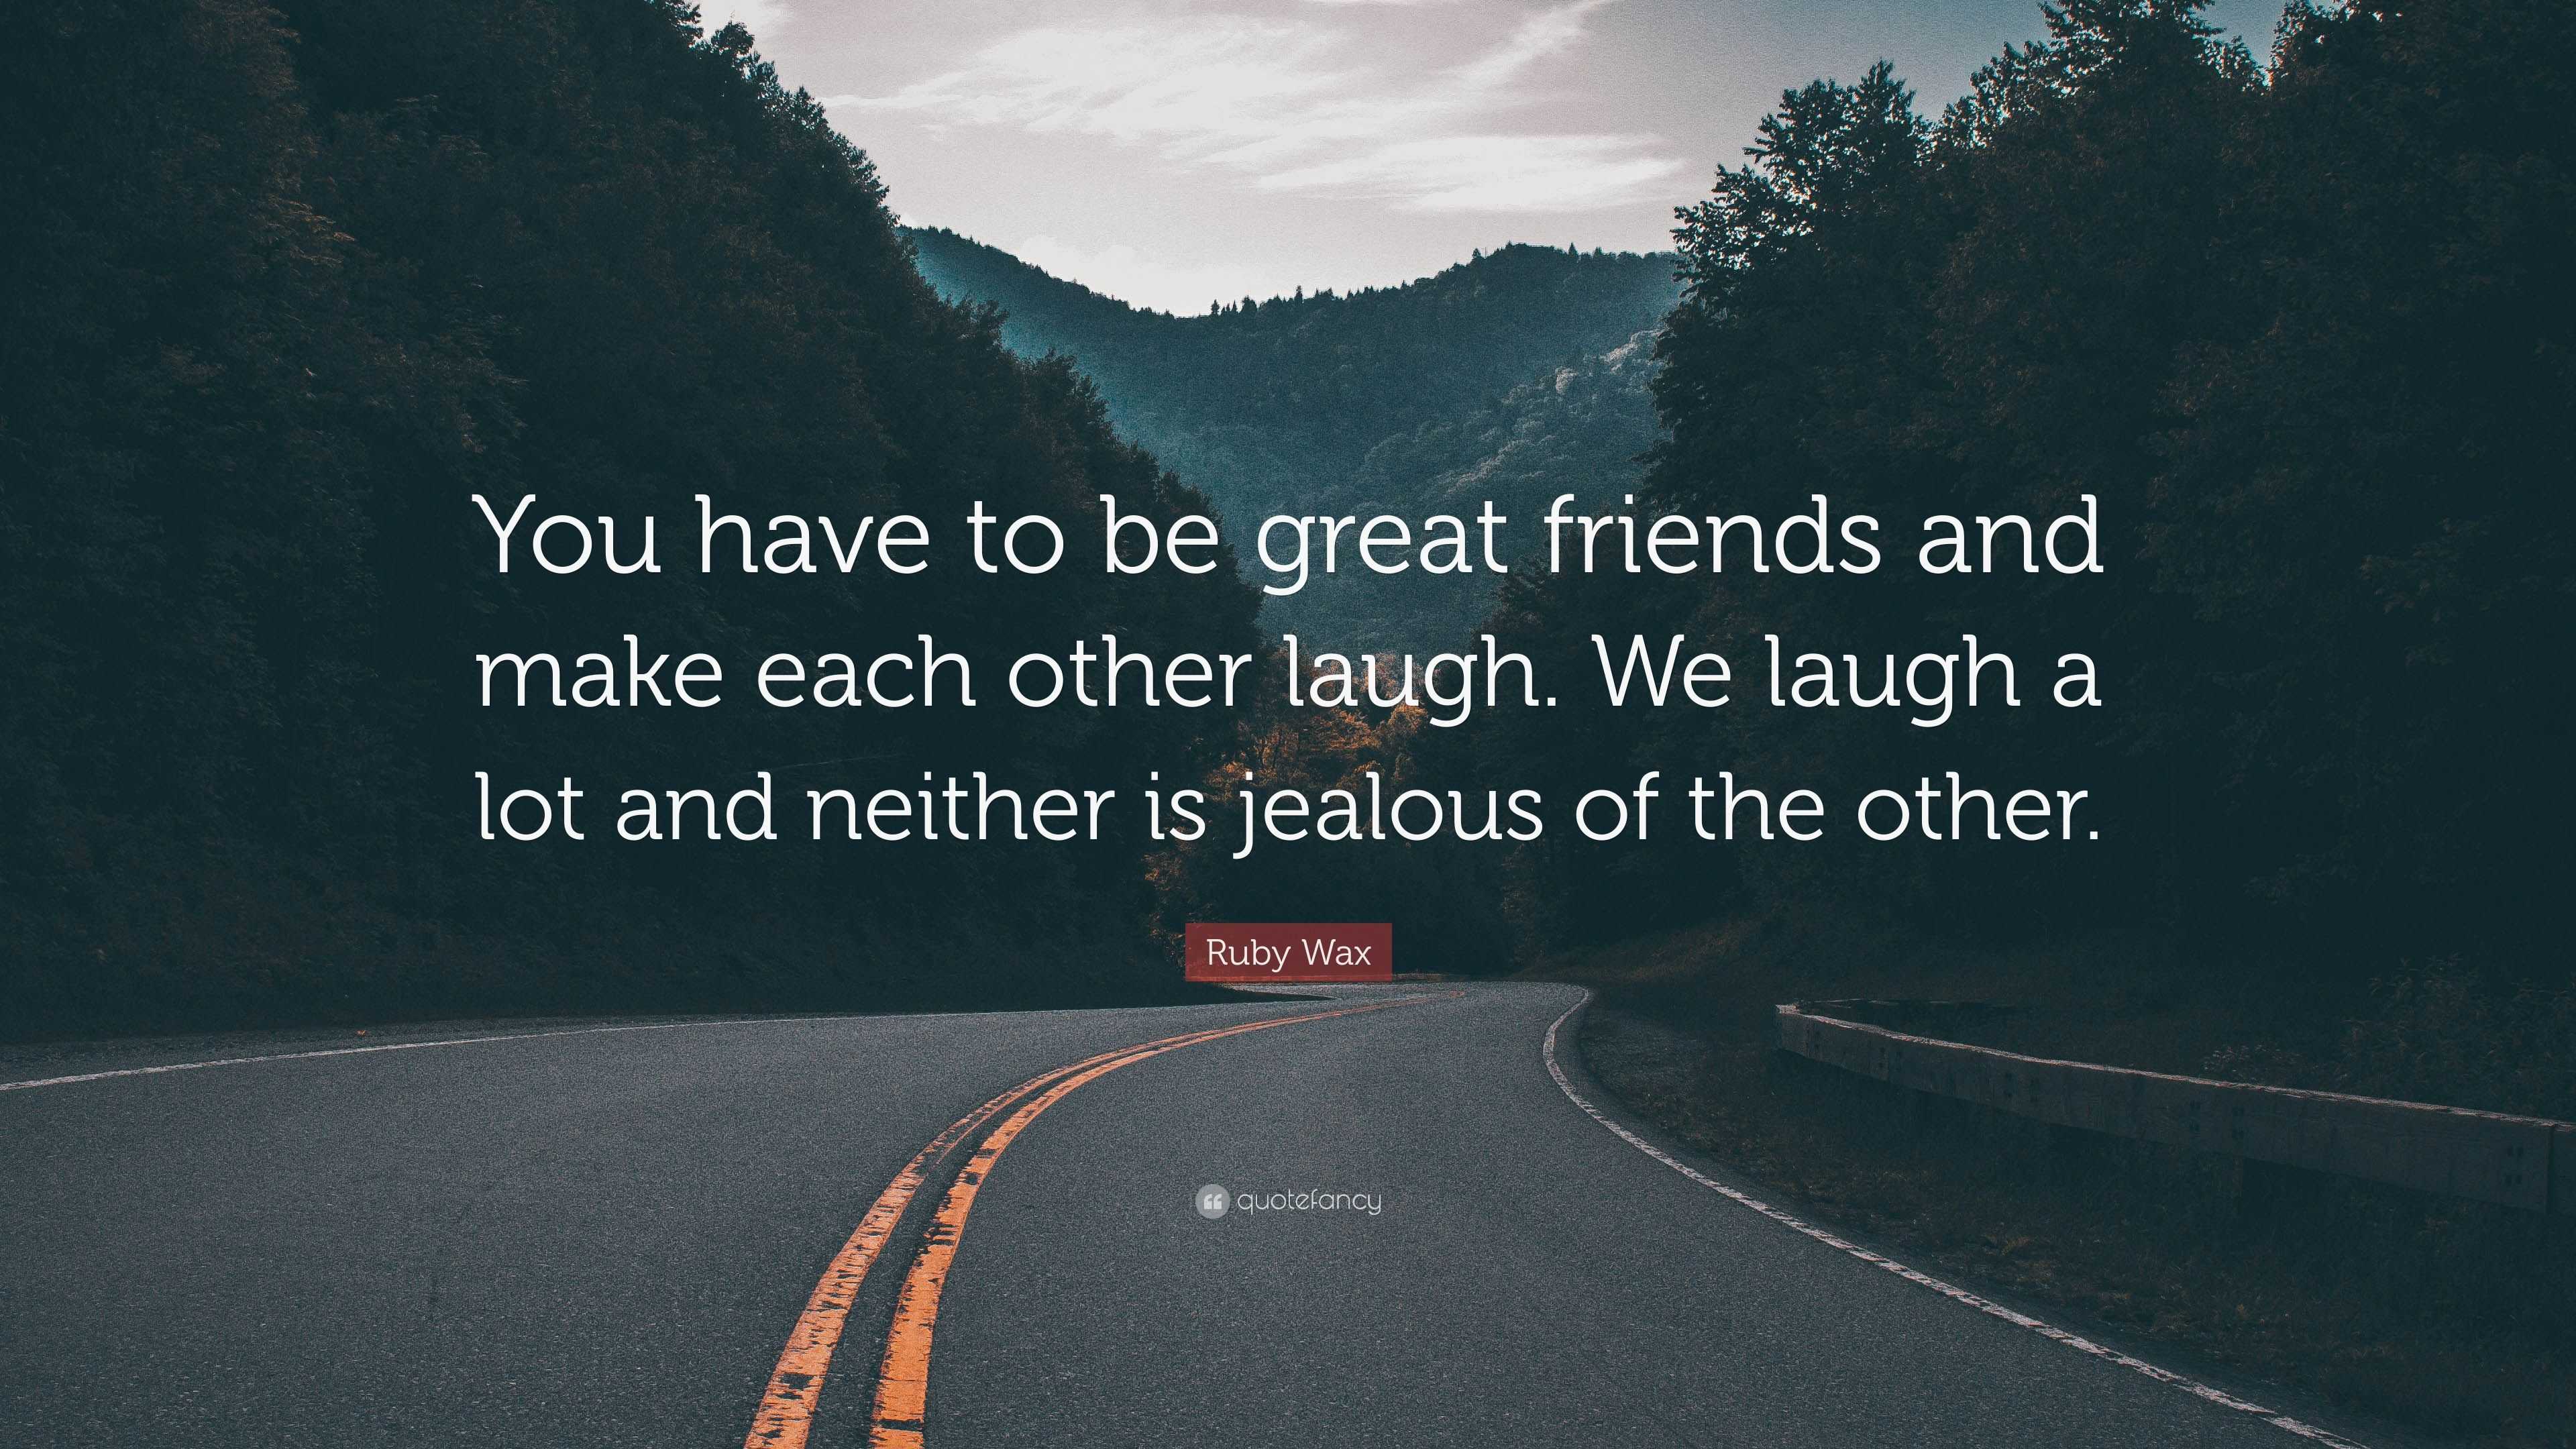 Ruby Wax Quote: “You have to be great friends and make each other laugh ...